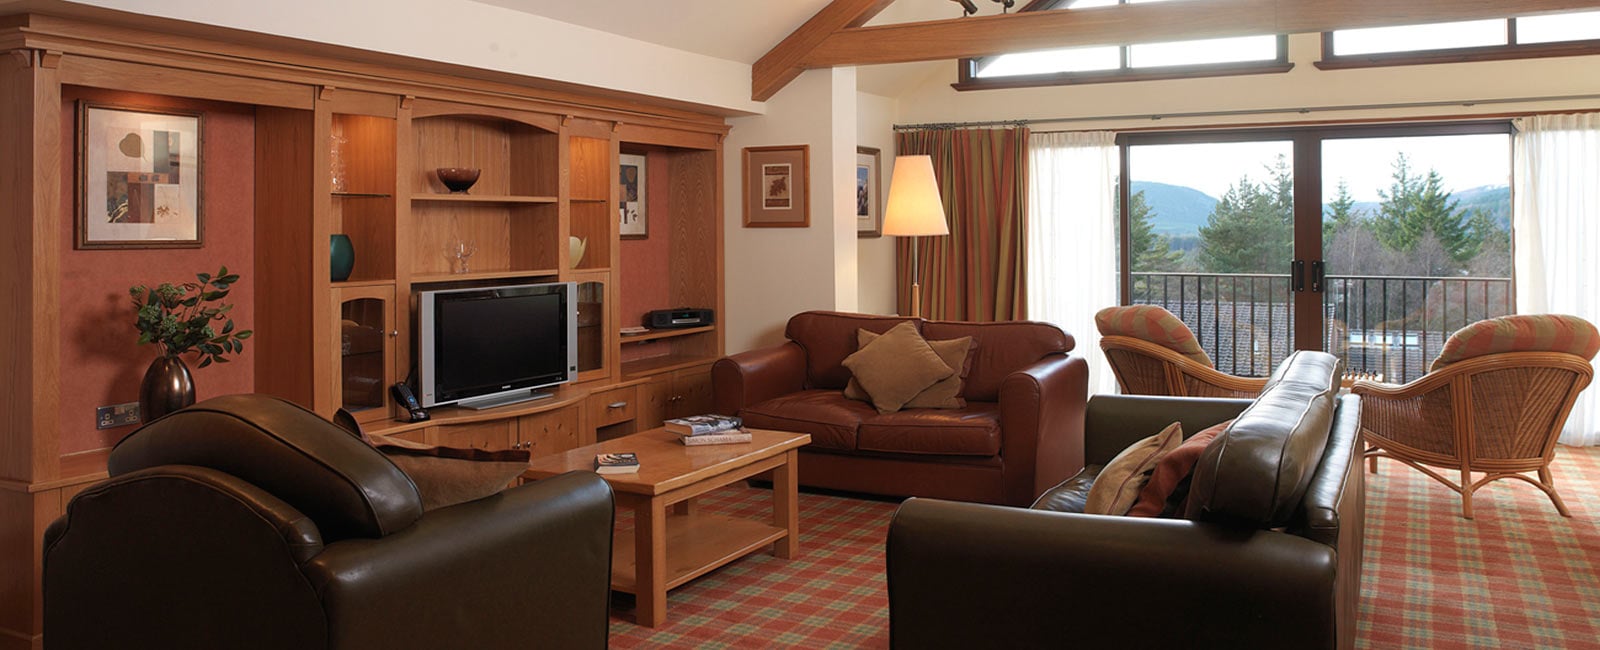 Living Area at Craigendarroch Lodges, Managed by Hilton Grand Vacations in Royal Deeside, Scotland